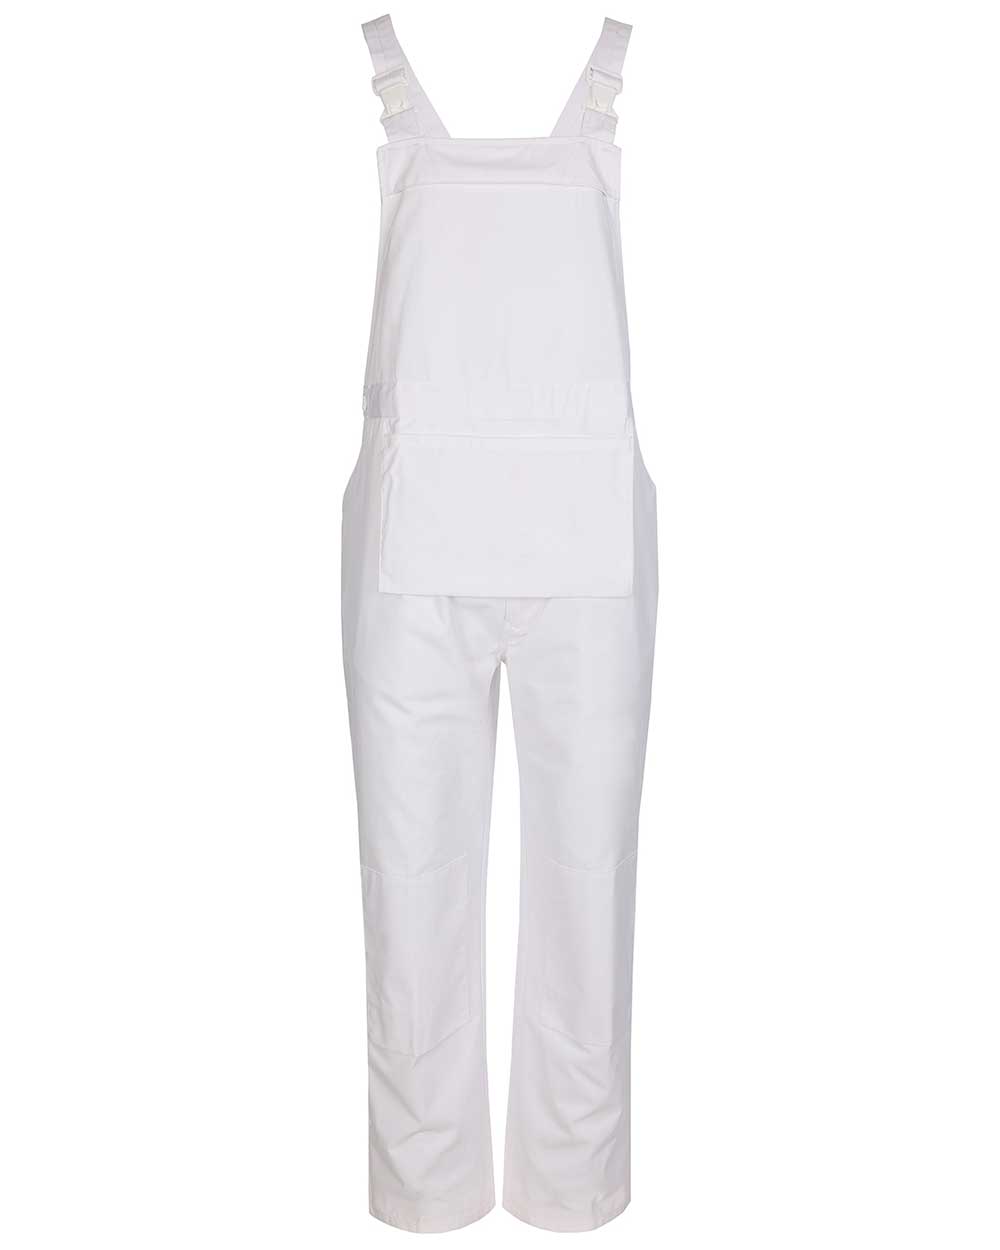 White coloured Fort Bib &amp; Brace Overall Polycotton on white background 